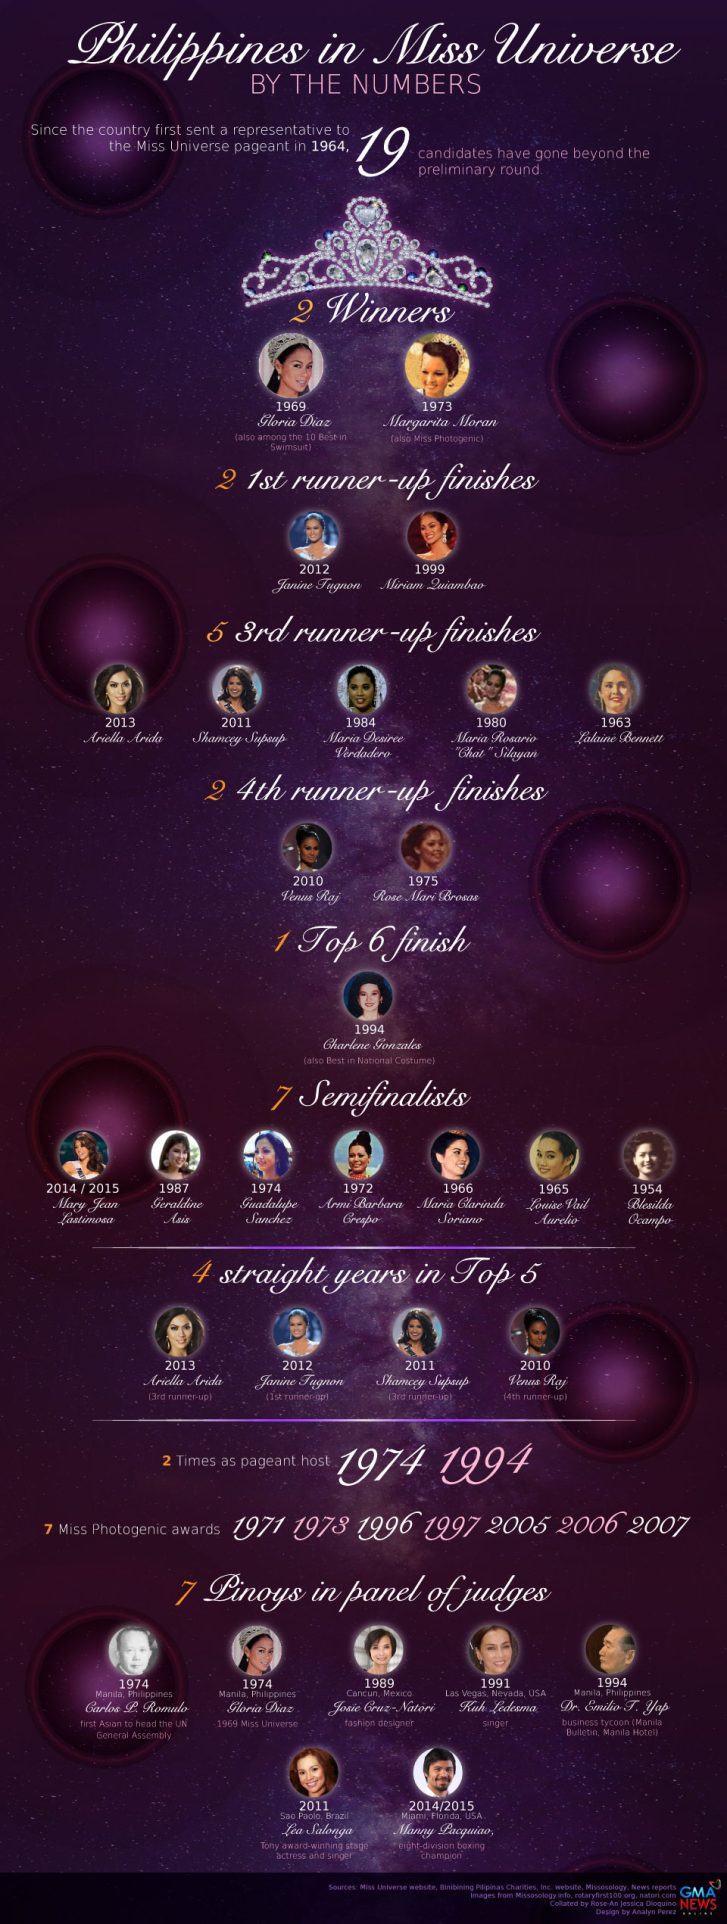 The Philippines in Miss Universe by the Numbers